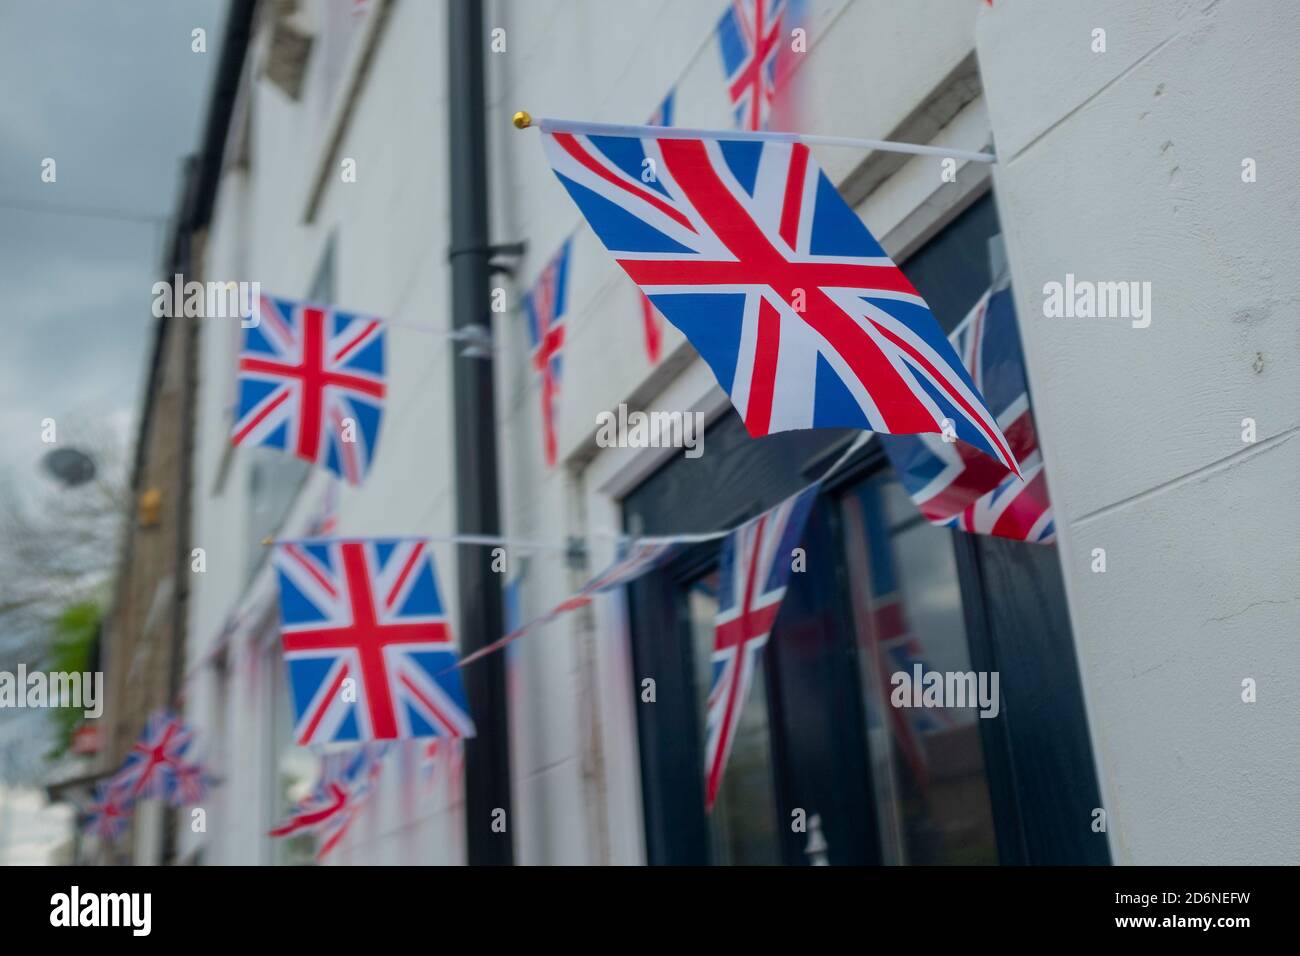 8th May, 2020, Durham. Union Jacks flying as part of the VE Day 2020 celebrations during COVID-19 lockdown. Stock Photo